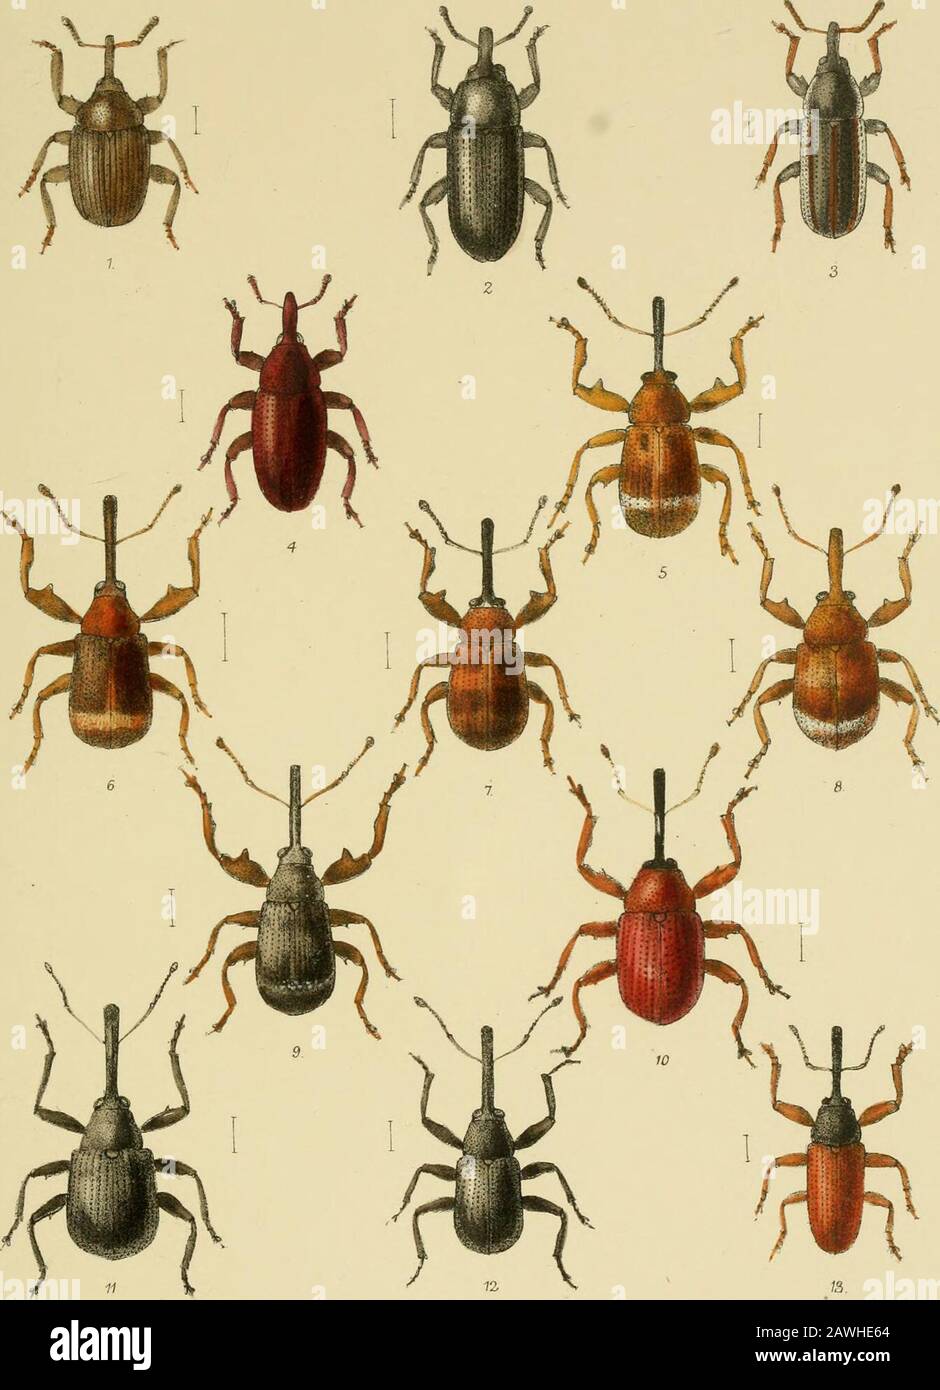 The Coleoptera of the British islandsA descriptive account of the families, genera, and species indigenous to Great Britain and Ireland, with notes as to localities, habitats, etc . P.lfor^aiid.el,etlith Vincent Brool^s,Day &,.SonlTap L Reeve 5l C° London. !TY ,. USA PLATE CLXX. Fig. I. Gymuetron coUinus, GyU. 2. Mecinus pyraster, Herhst. y. ,, circulatus. Marsh. 4. ,, coUaris, Germ. 5. Anthouoinus ulmi, De U. 6. „ „ ,. var. 7. ,, Rosina;, Ves (iozis. 8. „ pedicularius, L.i). ,, pomorum, L. 10. ,, varians, Payl:. 11. ,, rubi, Herhst. 12. ,, comari, Crotch. 13. Brachouyx piueti, Payl-: {indige Stock Photo